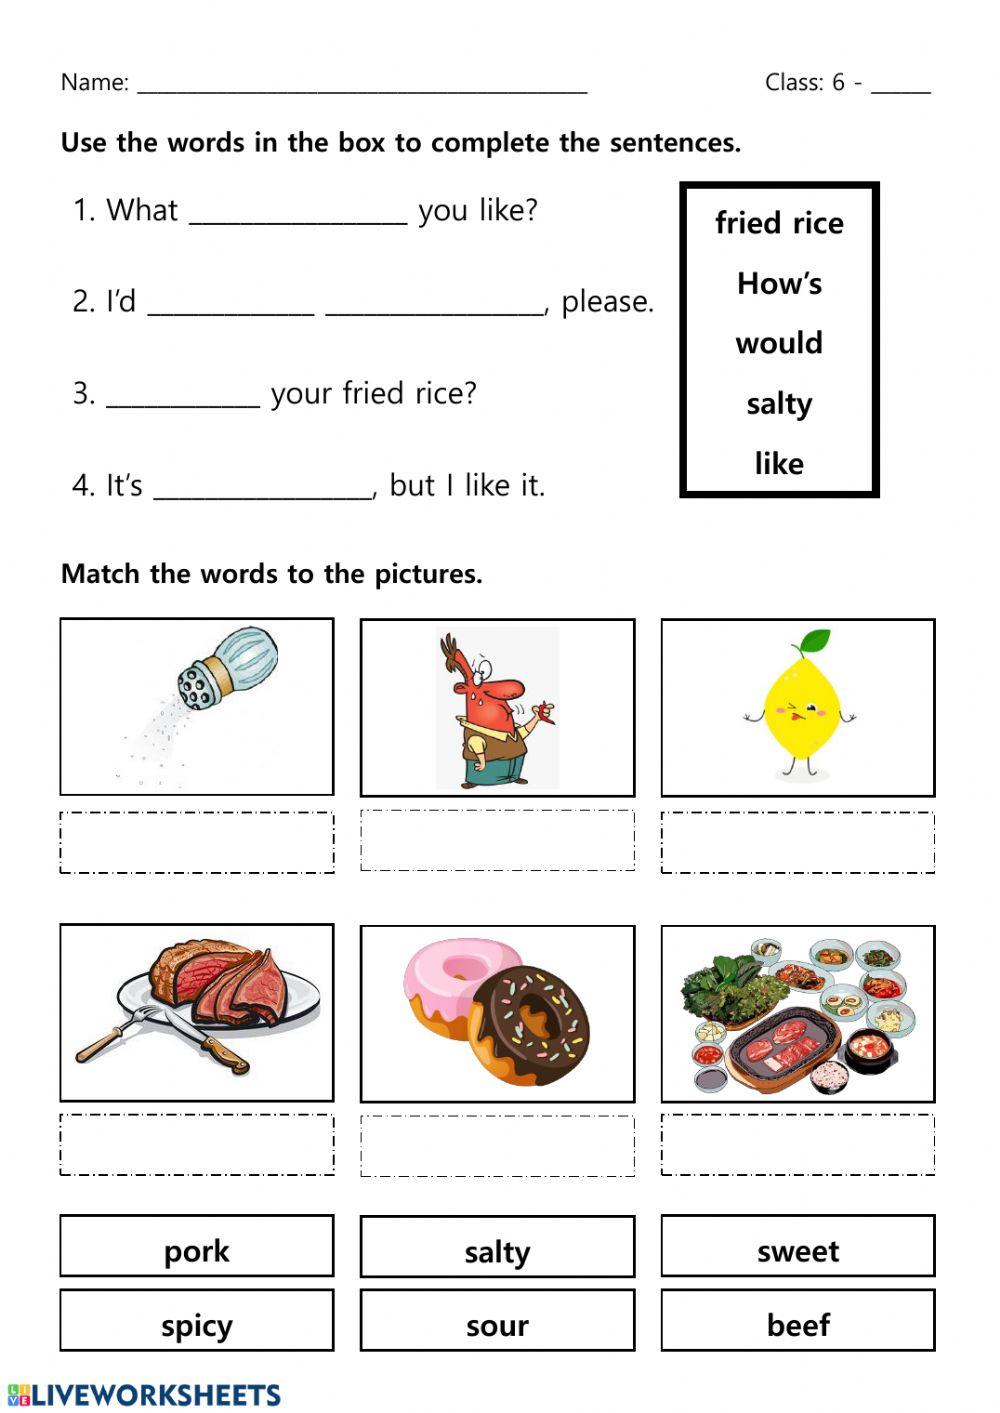 What would you like? worksheet | Live Worksheets